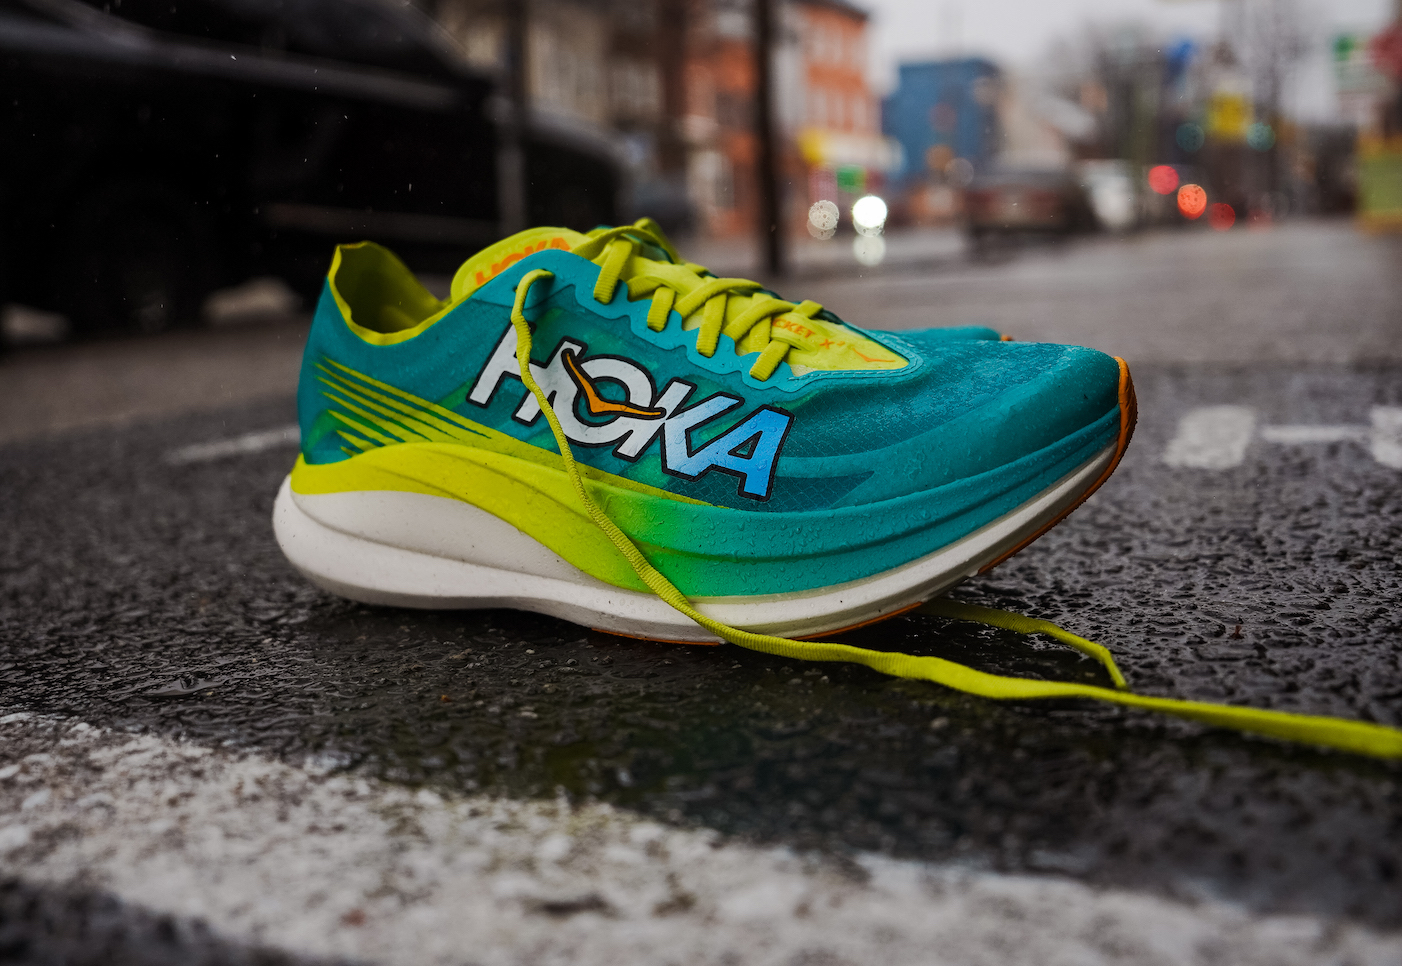 hoka rocket x 2 with teal and yellow upper with a city street in the background